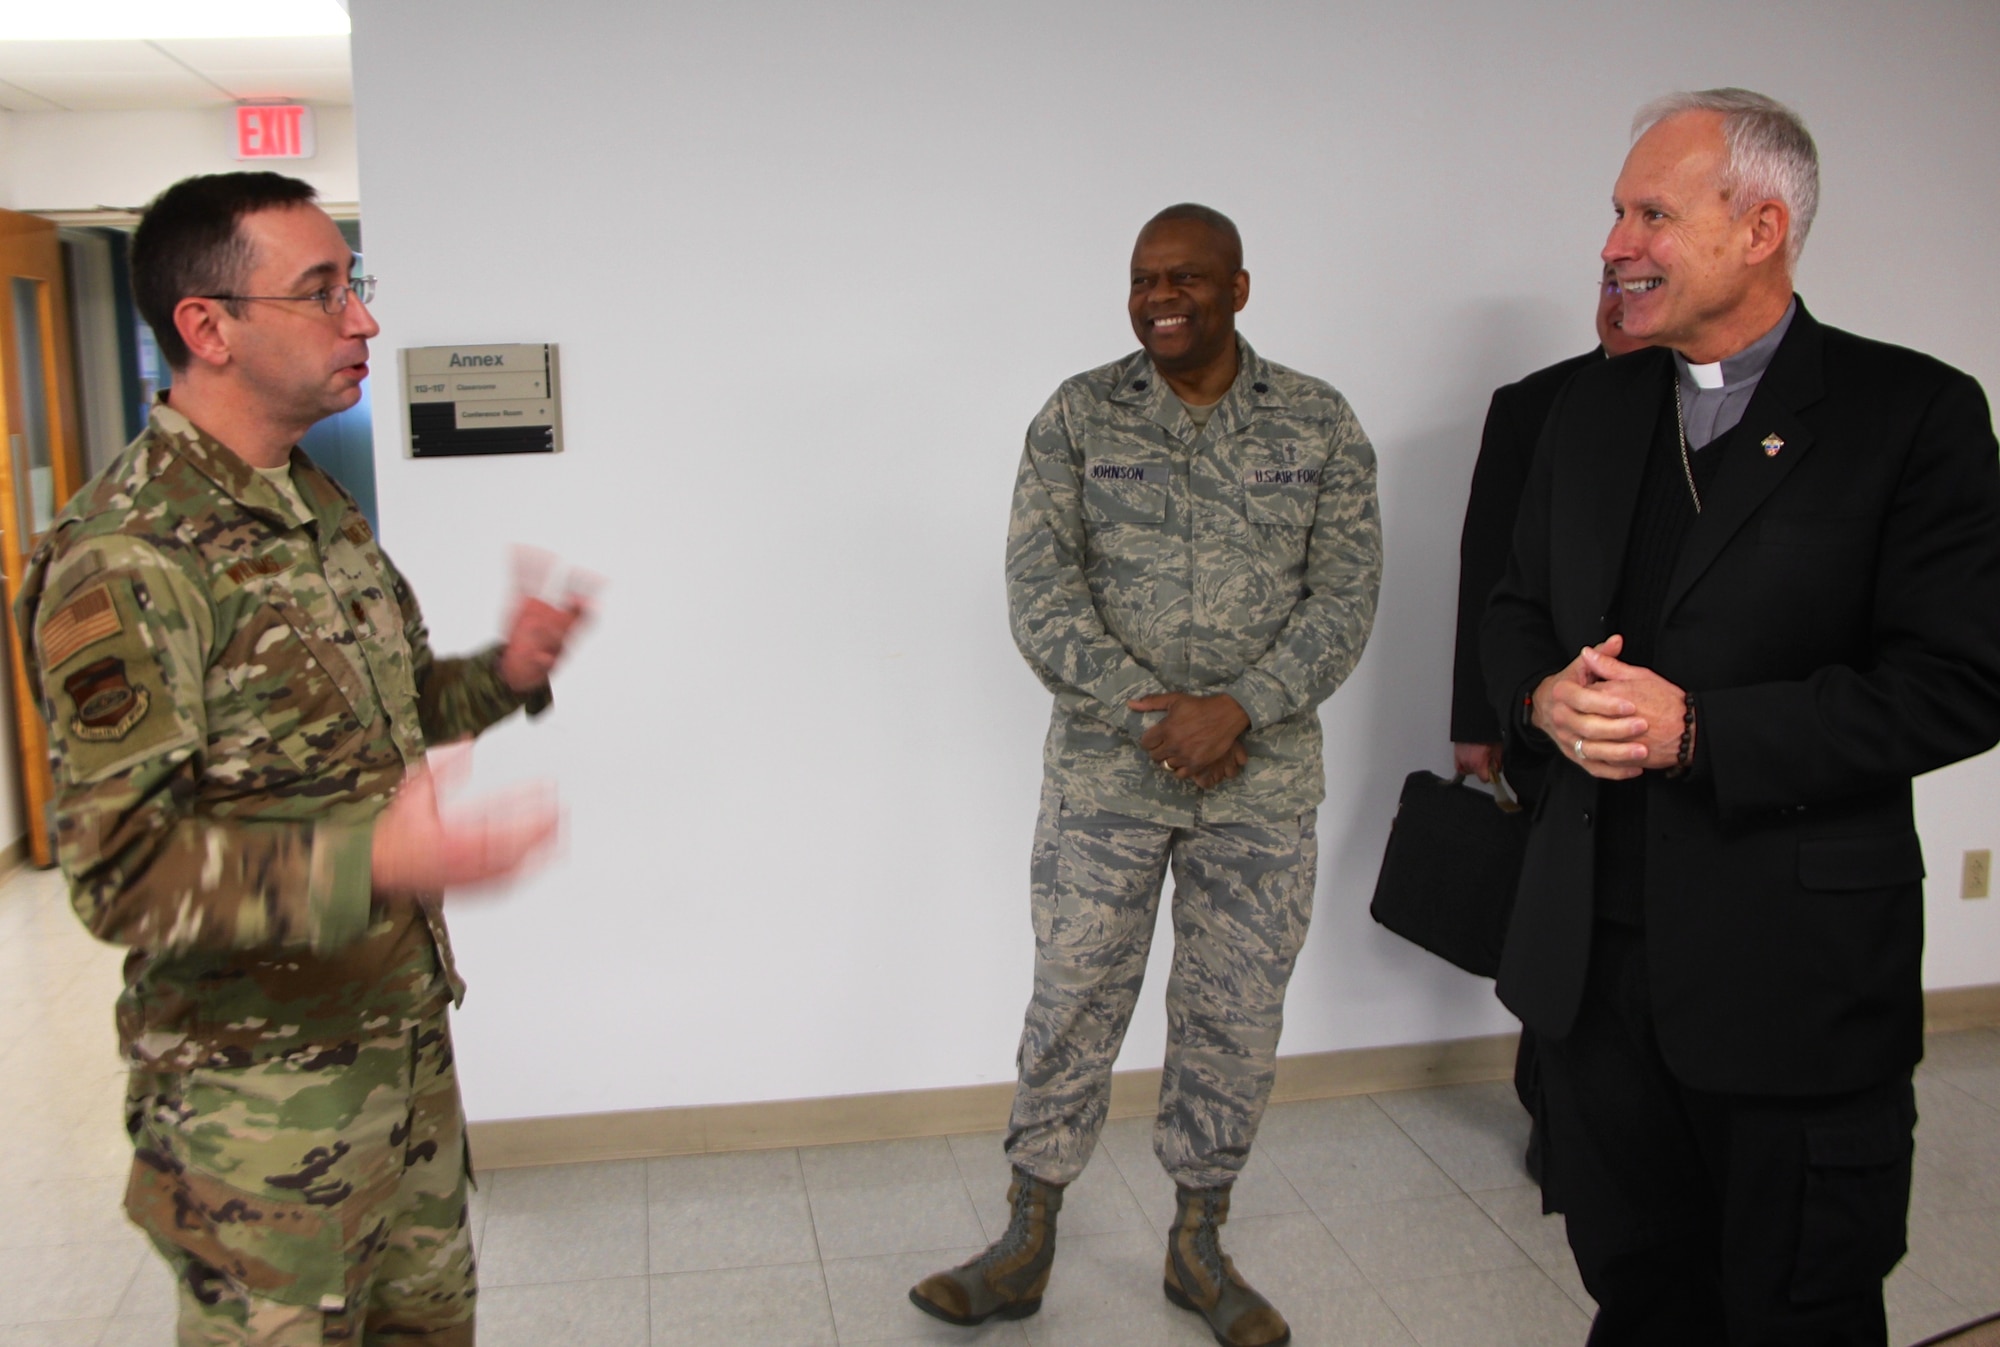 932nd Airlift Wing Chaplain (Maj.) Michael Williams greets special guest Bishop Richard Spencer, the Roman Catholic Auxiliary Bishop for the Archdiocese of Military Services, who visited Scott Air Force Base recently.